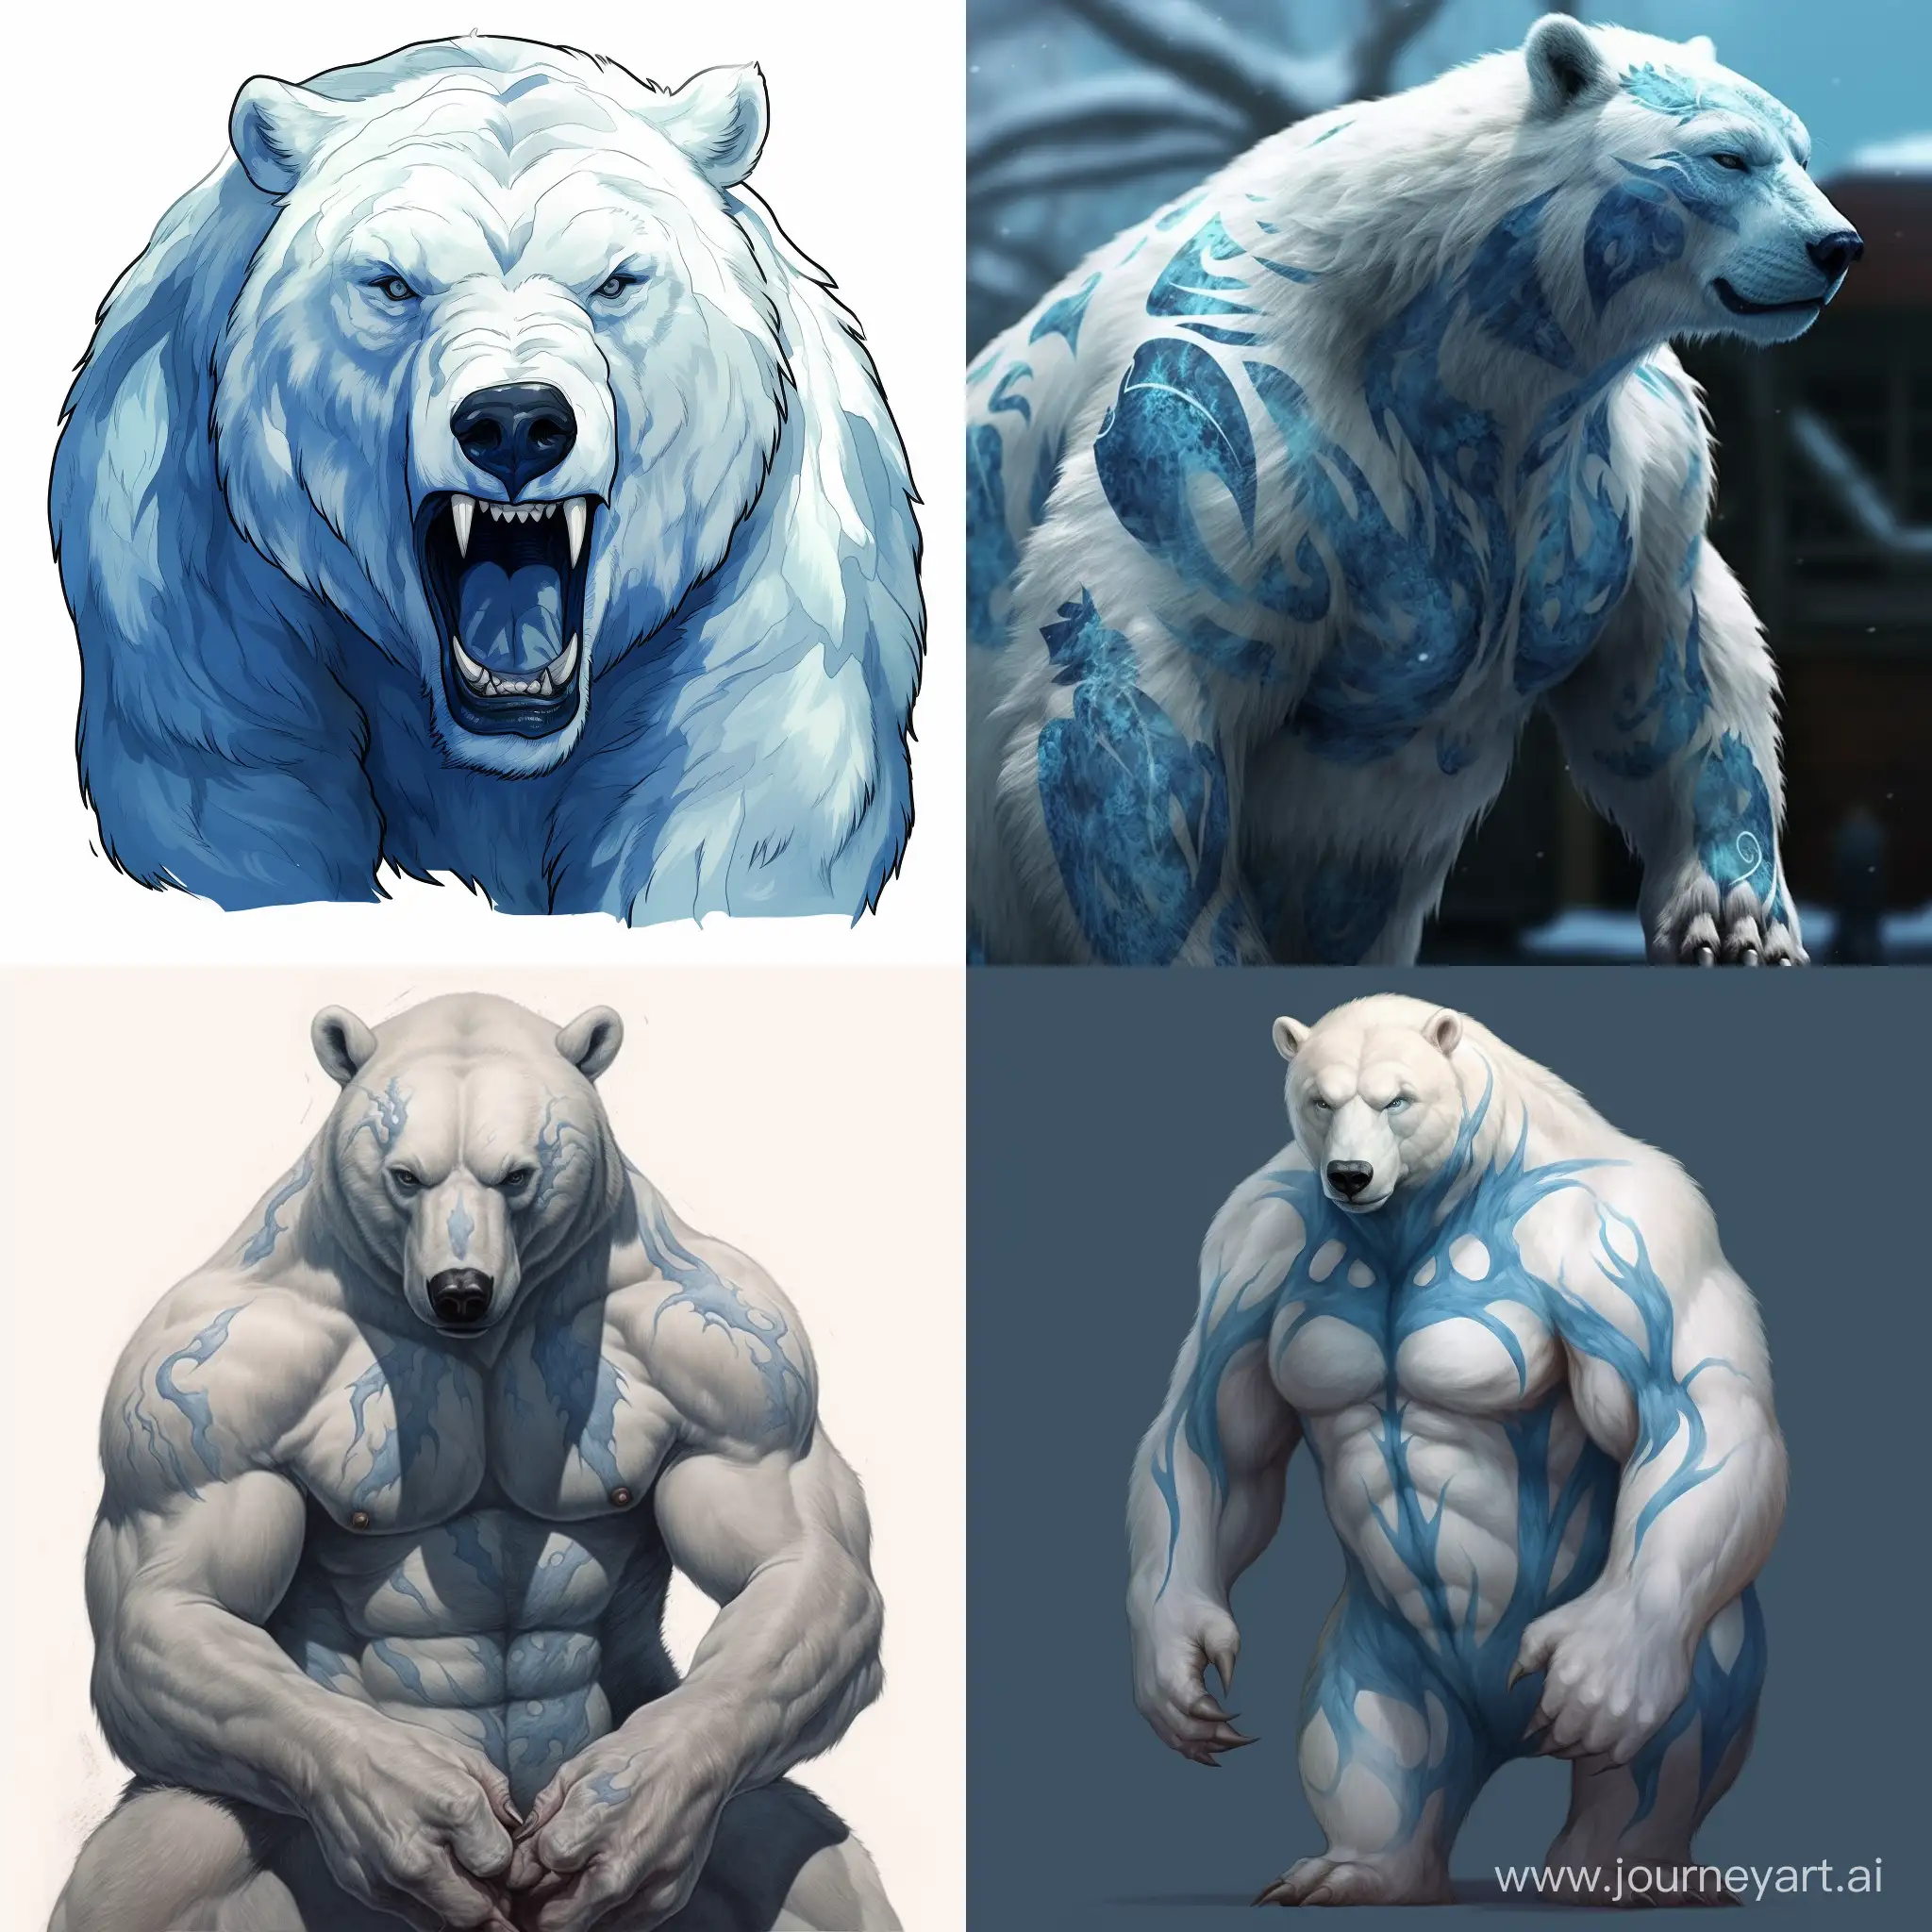 Draw a polar bear with a blue tattoo on his face, with thick fur. He should also be full-length, growl furiously, and have impressive muscles. He should have a glass of beer in his left paw.